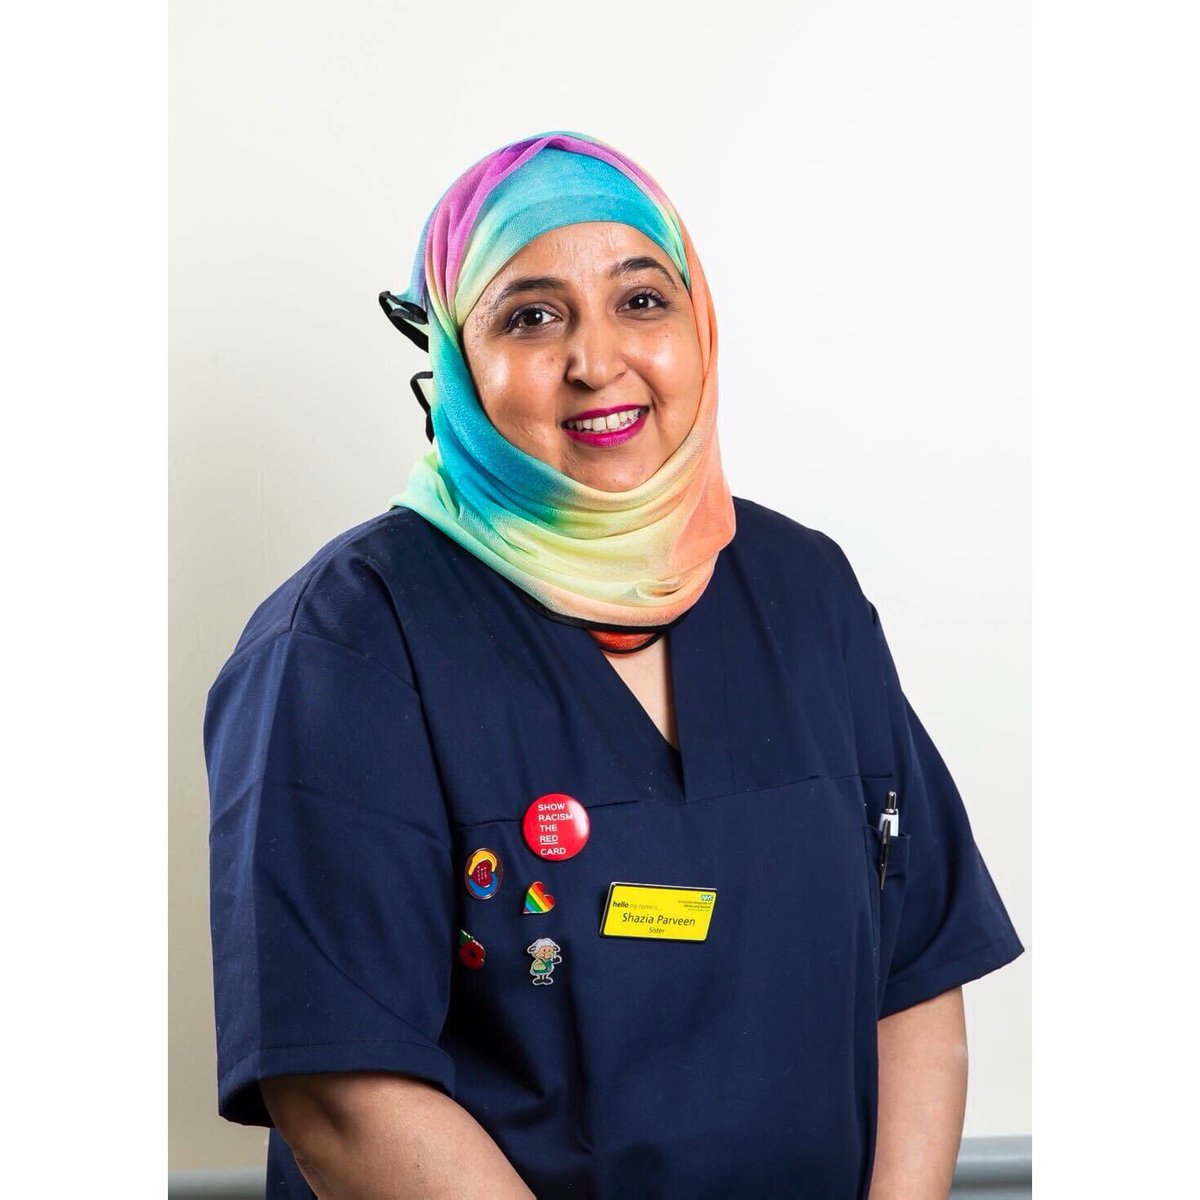 #MuslimWomensDay #NHSMuslimWomen I appreciate this person a lot.. she is always there to help and support no matter what.. fabulous at her job.. she is the go to person I would want looking after myself or a family member if we were sick.. @shaziaparv @UHDBTrust